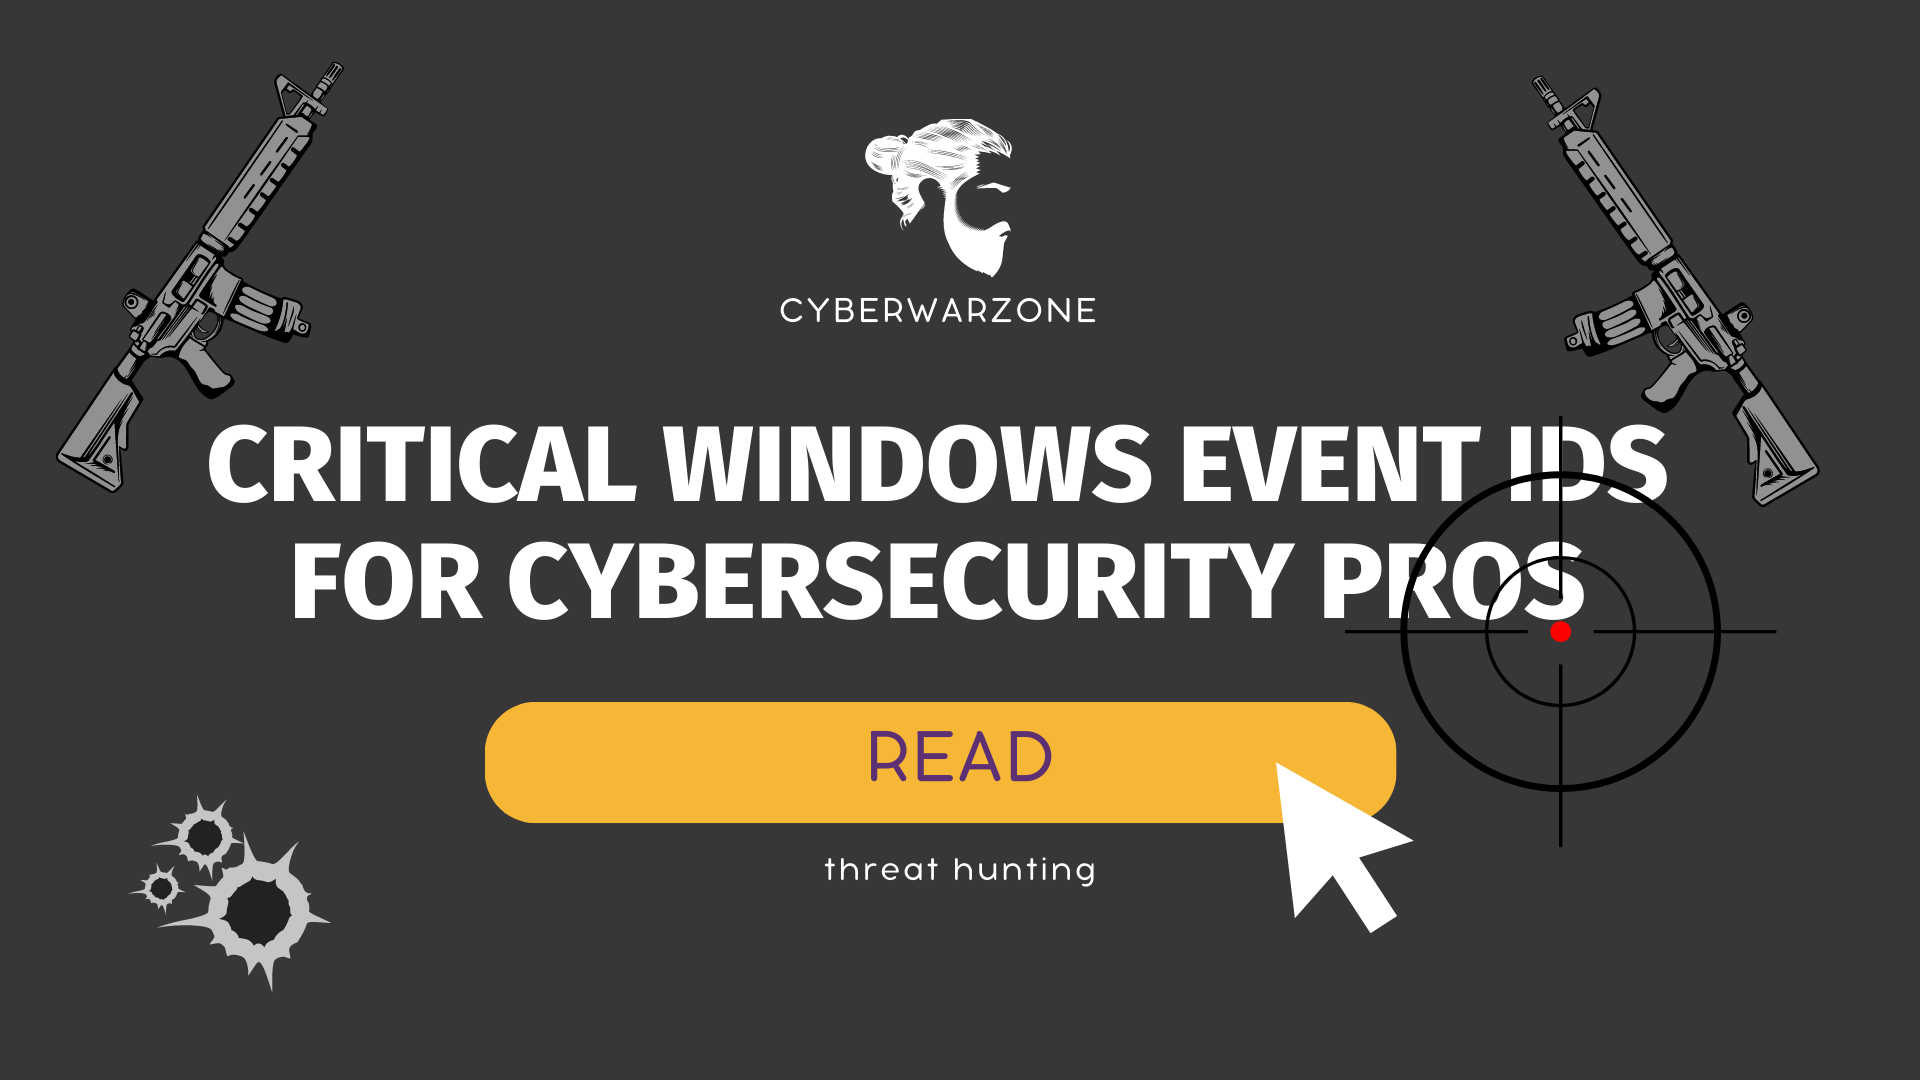 Critical Windows Event IDs for Cybersecurity Pros